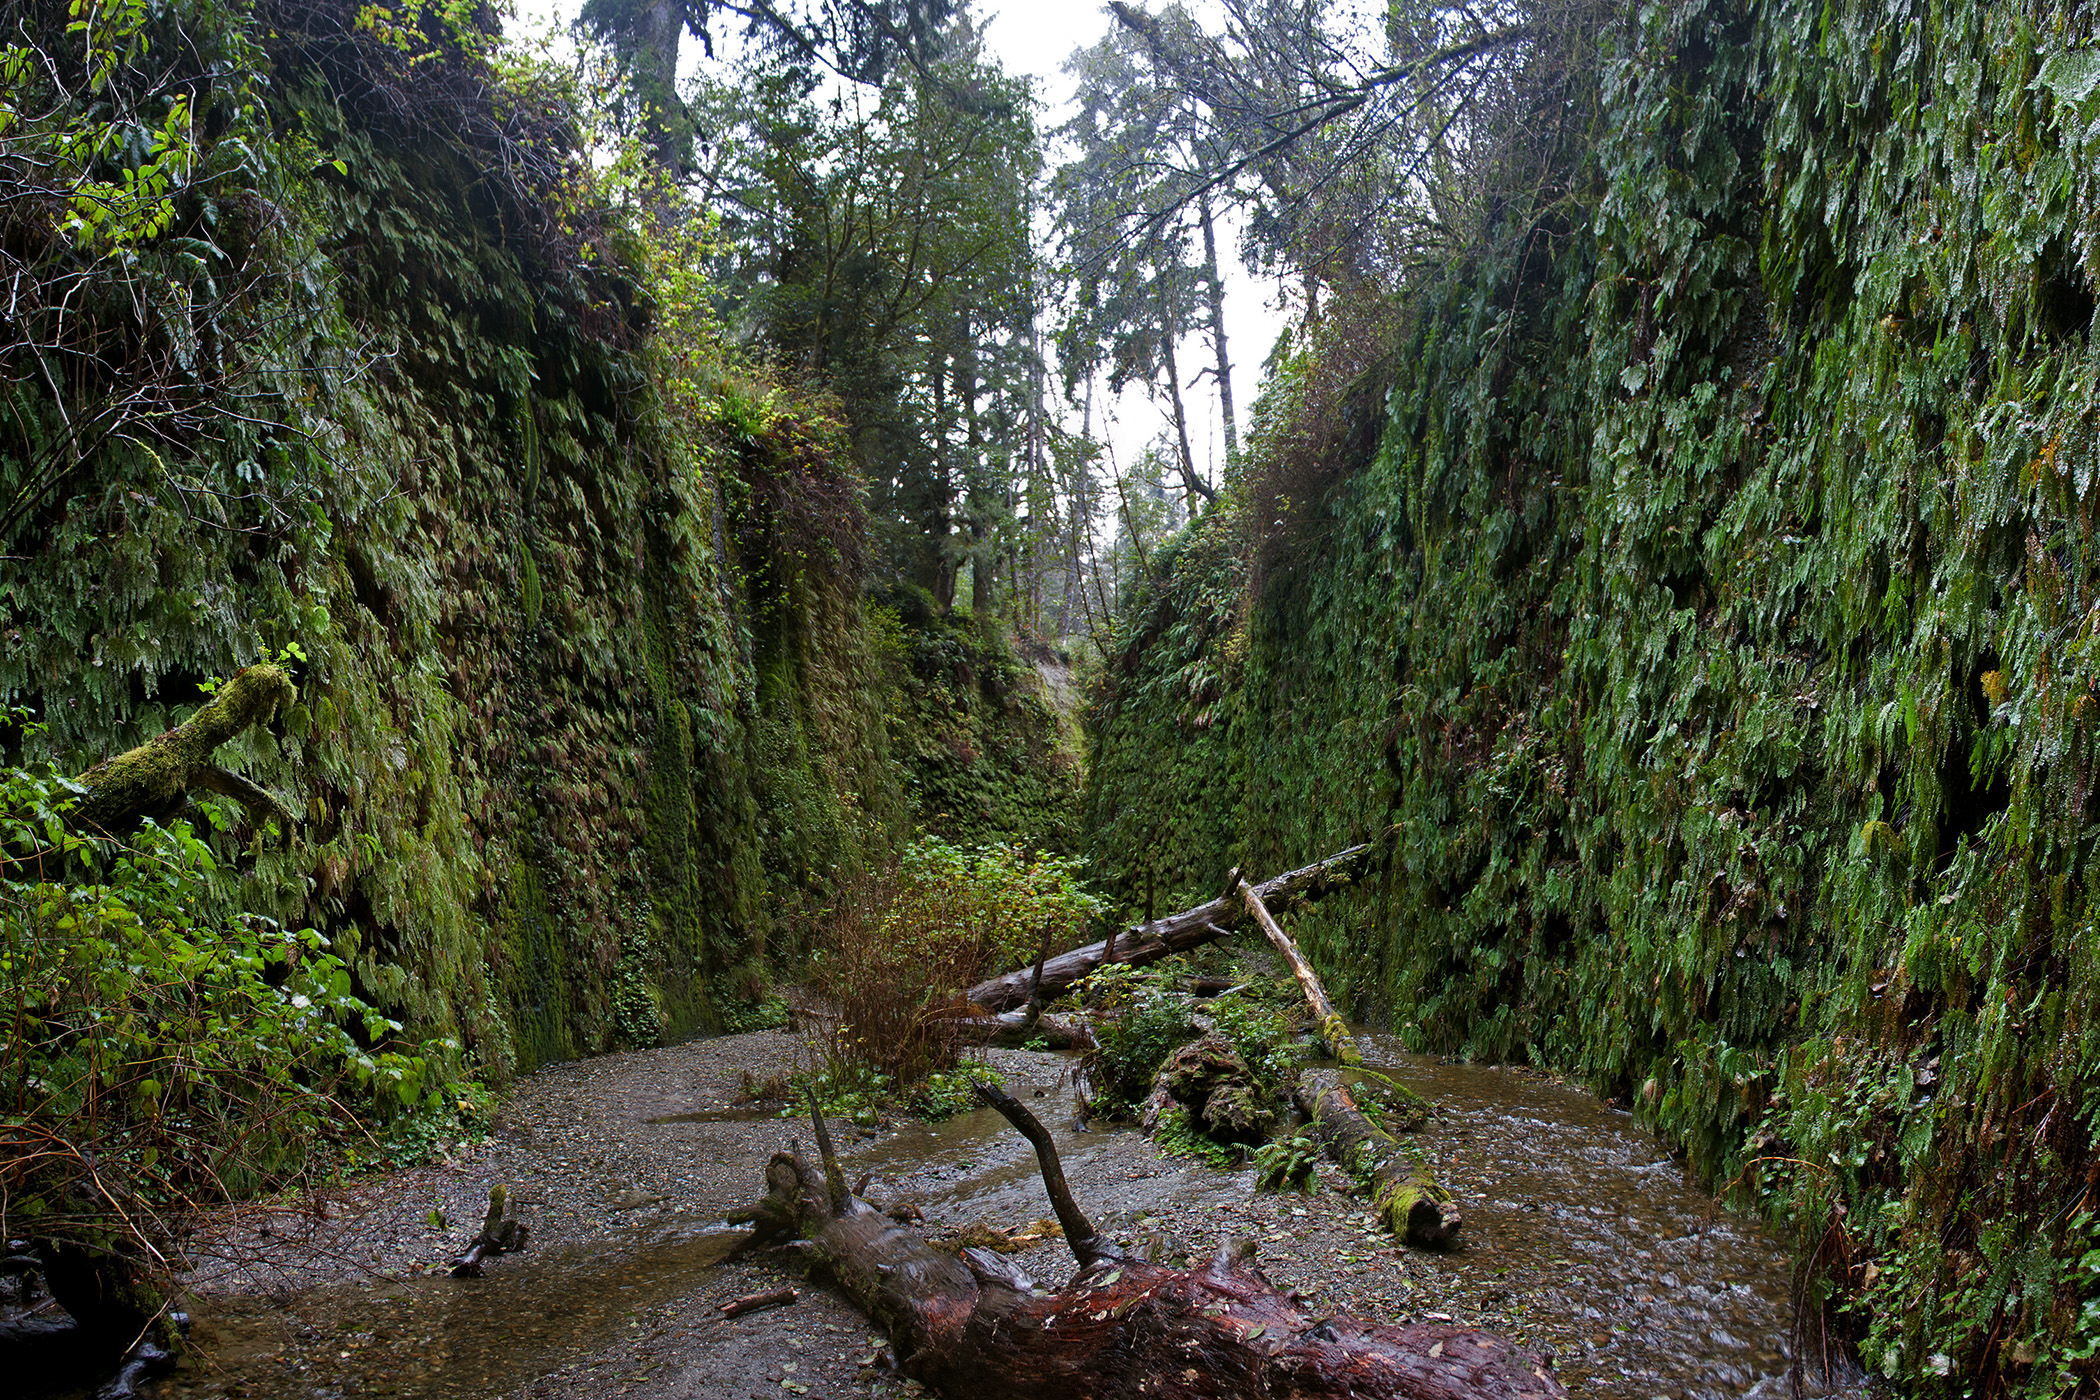 The Lost World location: Fern Canyon, Prairie Creek Redwoods State Park, Orick, California